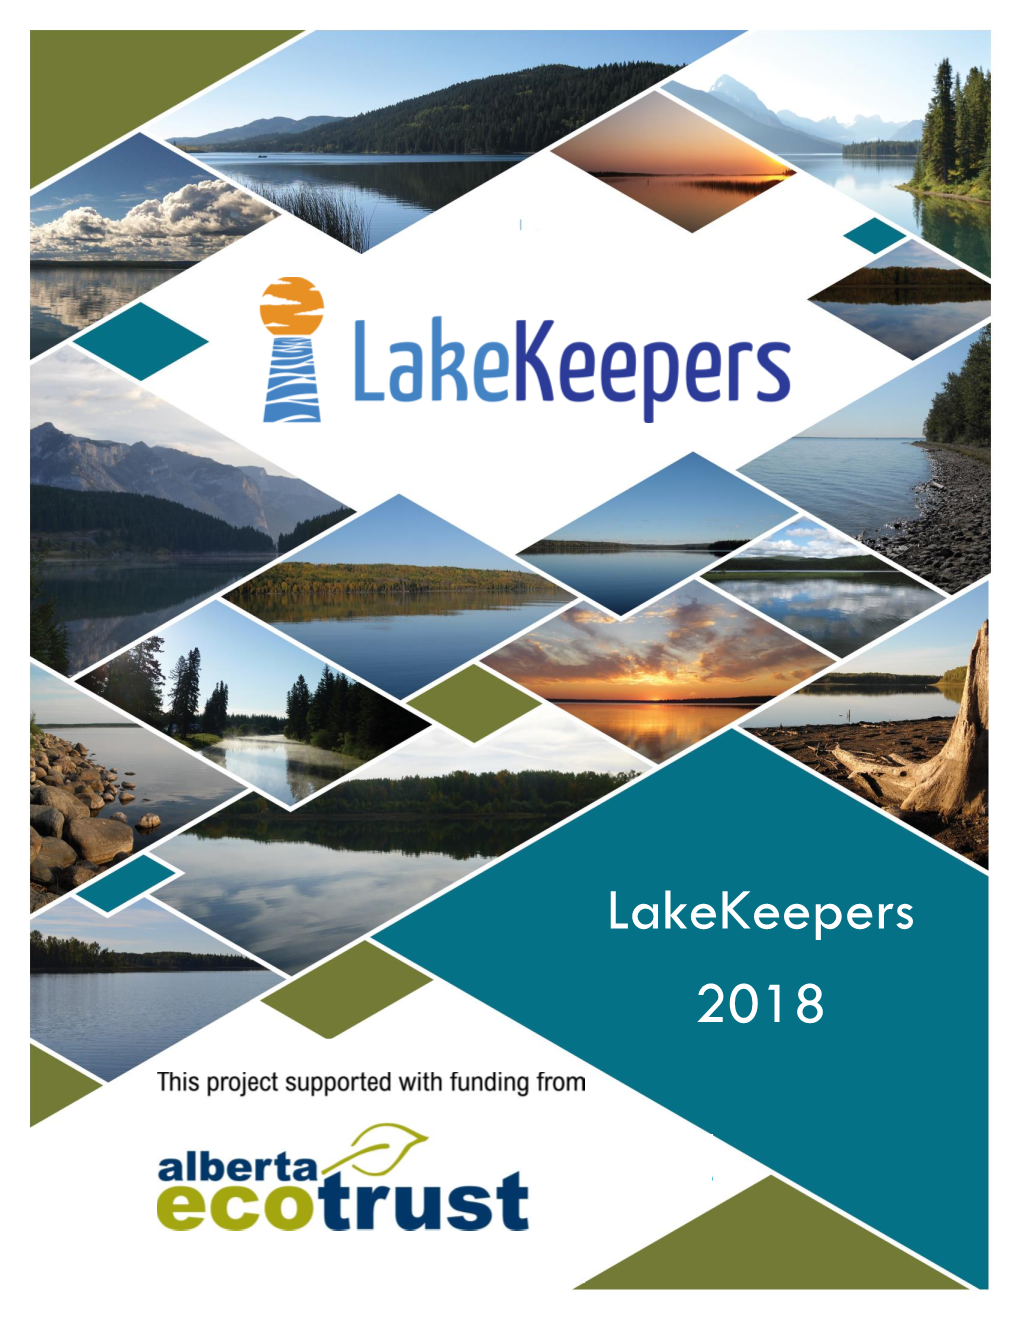 Lakekeepers 2018 ALBERTA LAKE MANAGEMENT SOCIETY’S OBJECTIVES